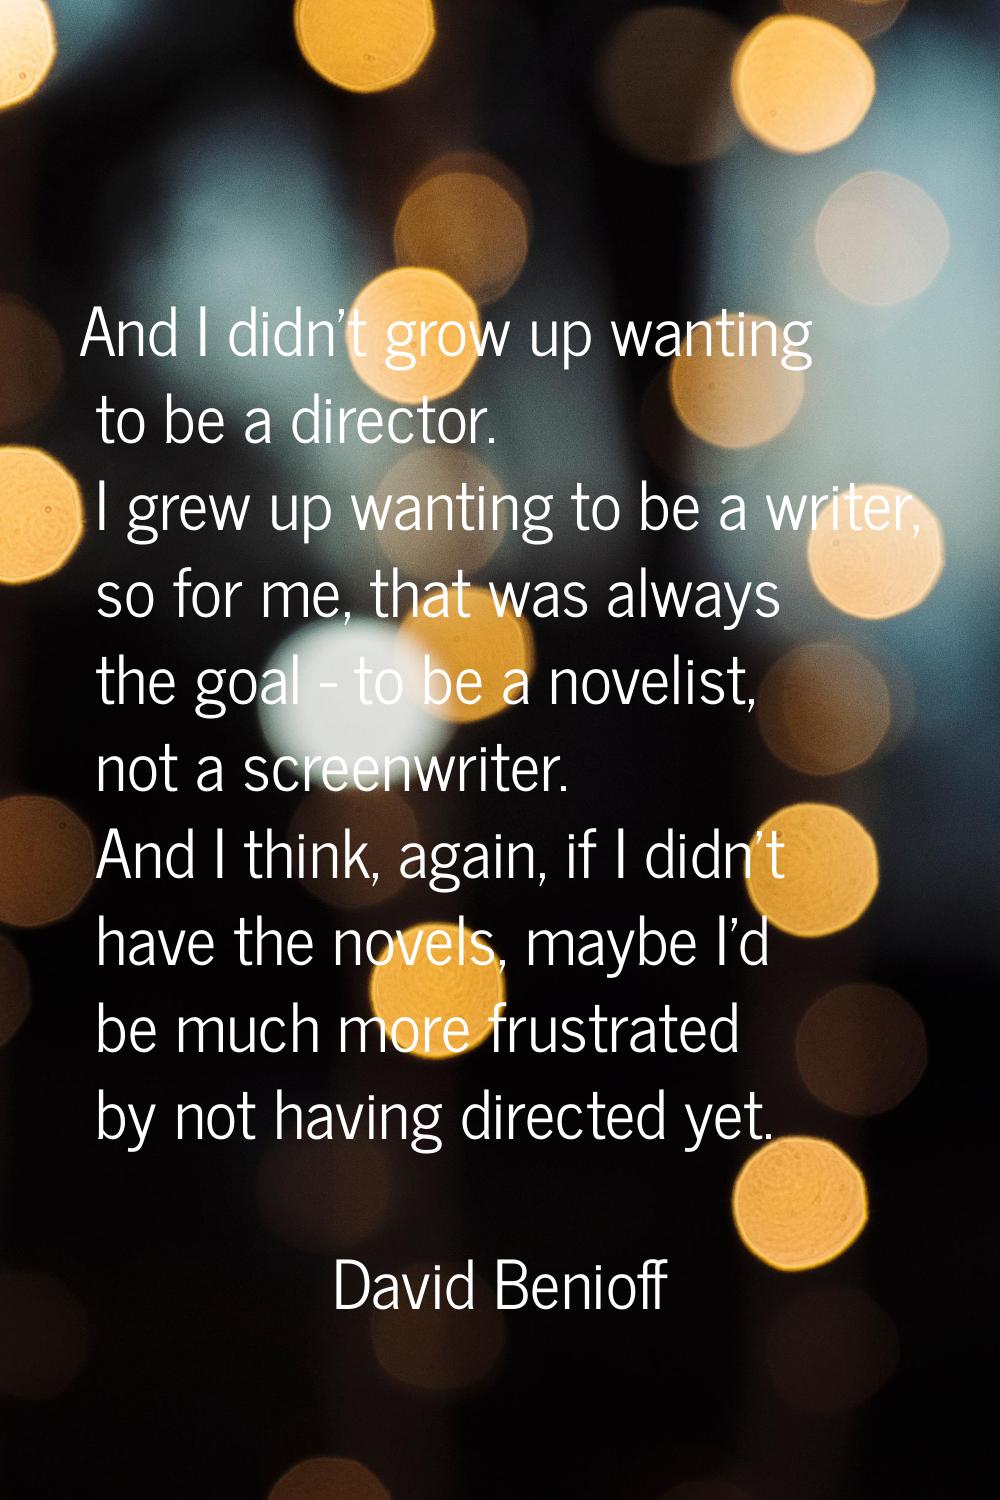 And I didn't grow up wanting to be a director. I grew up wanting to be a writer, so for me, that wa